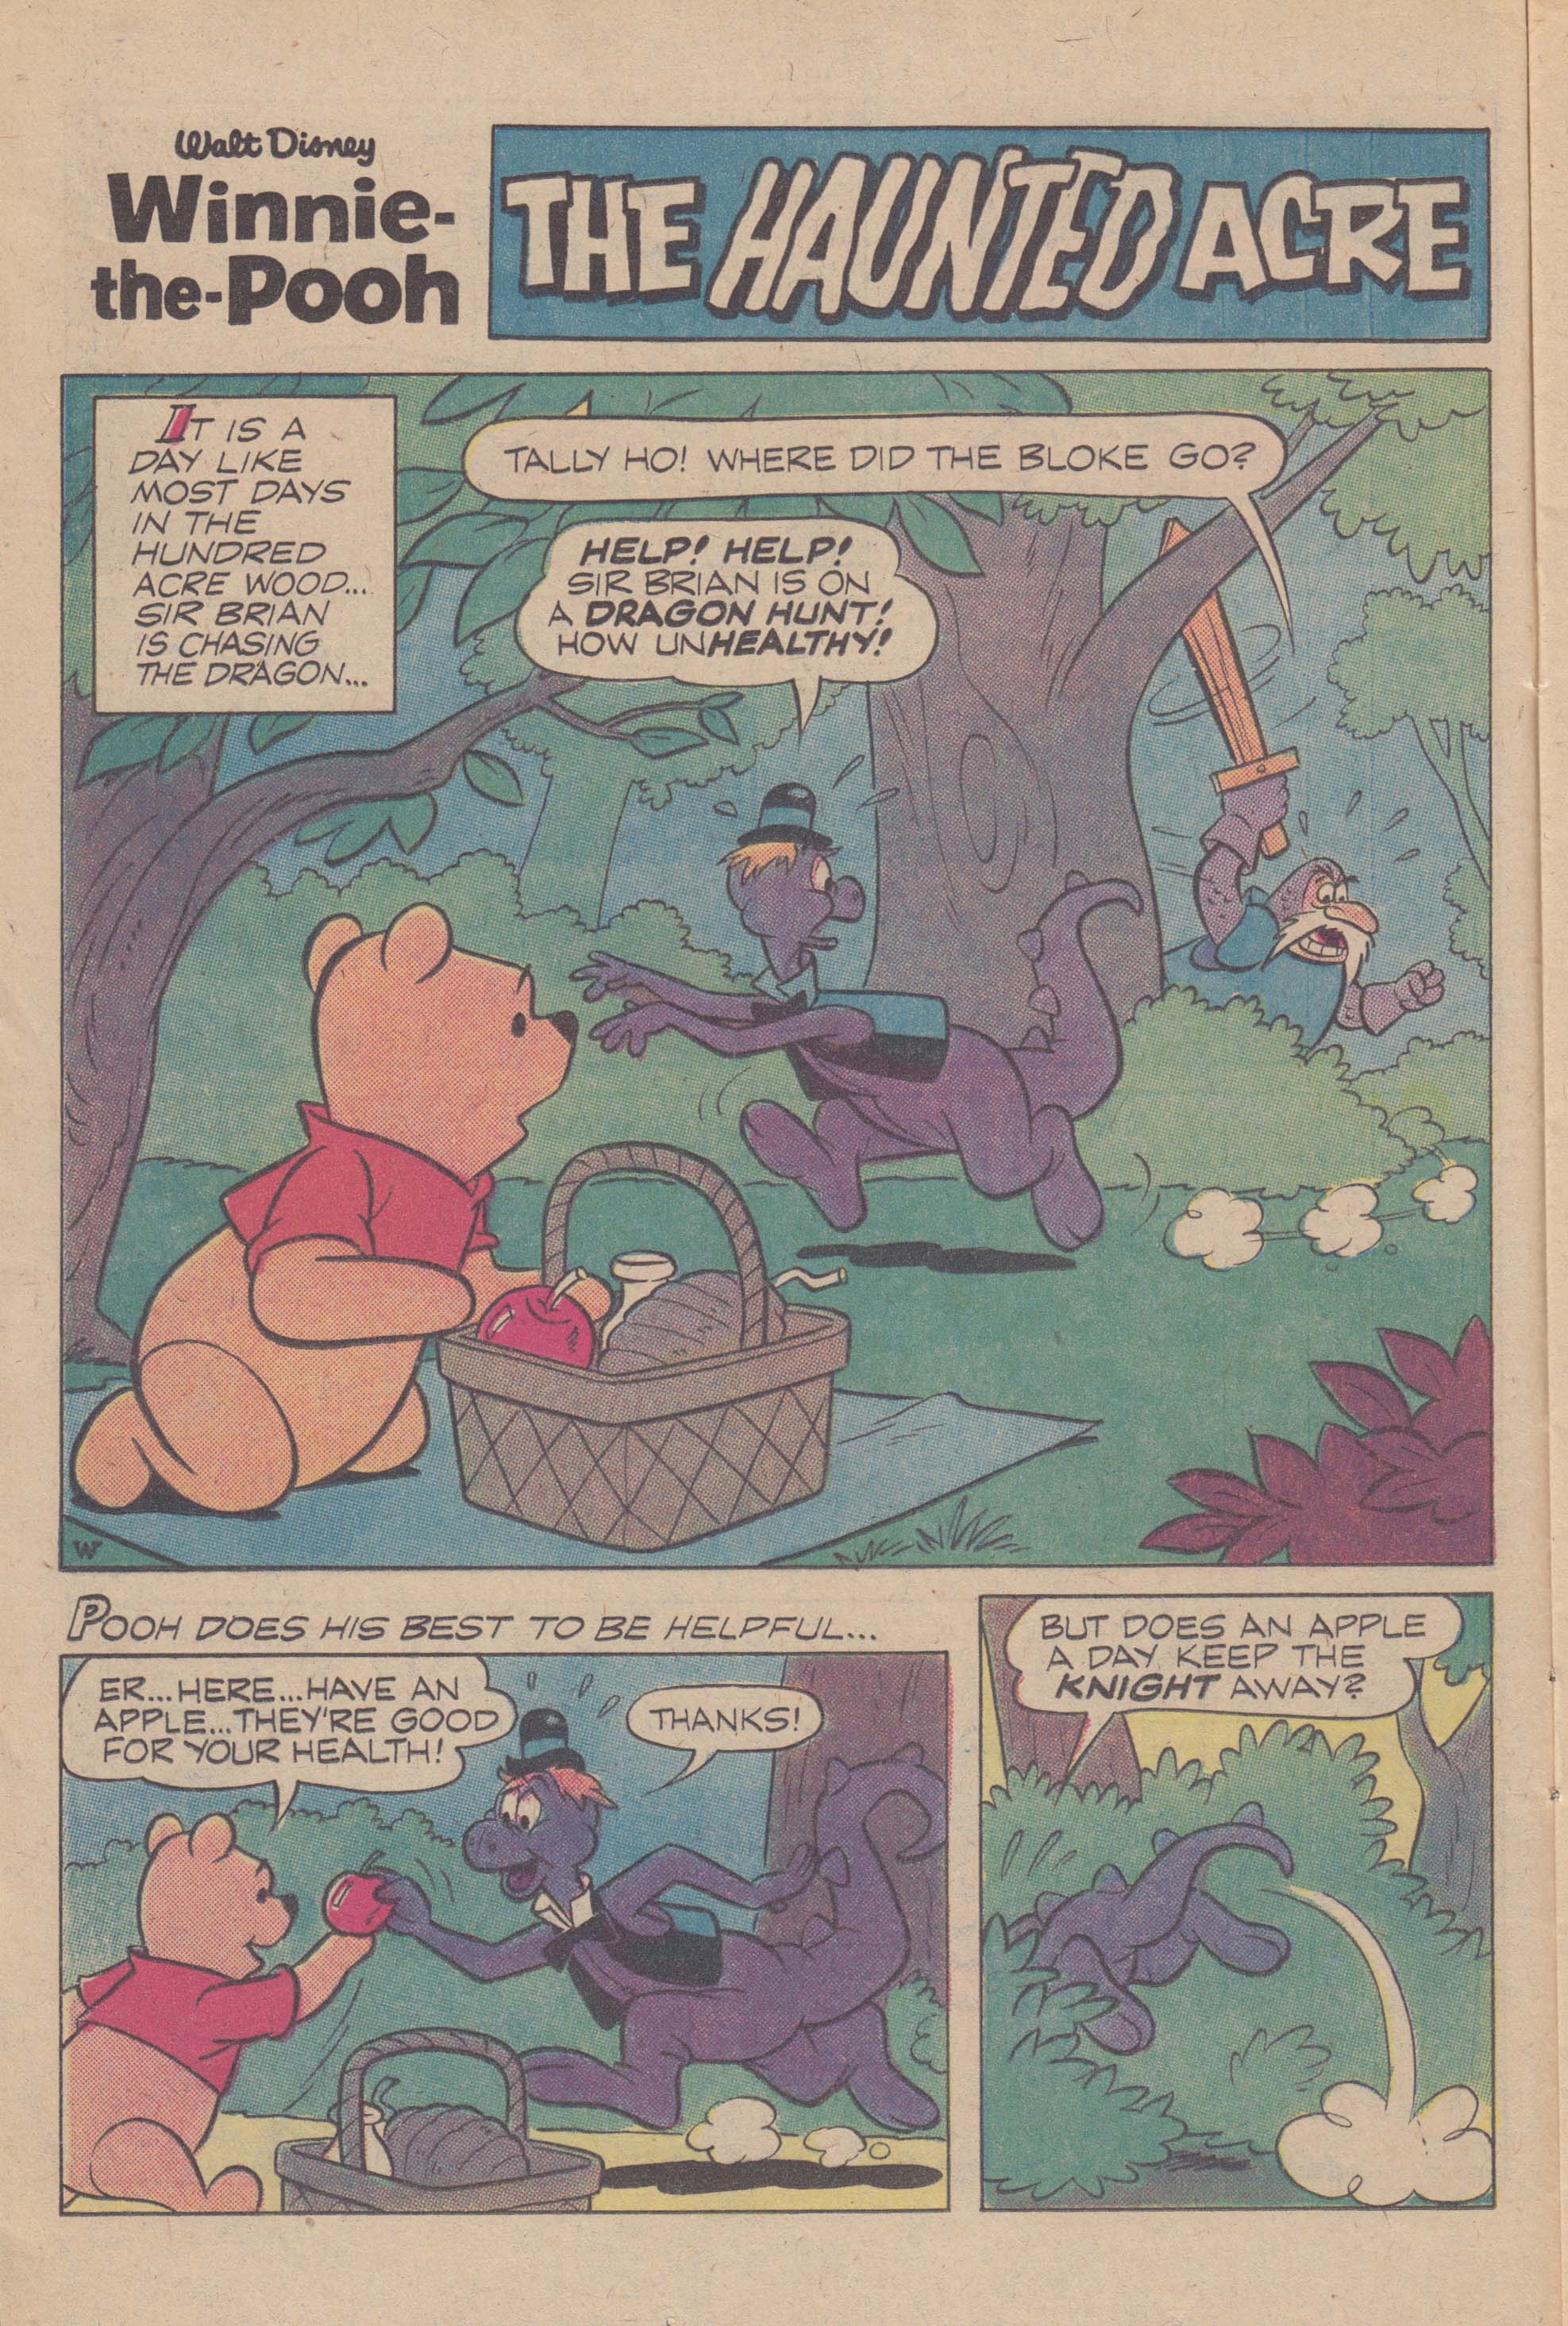 Read online Winnie-the-Pooh comic -  Issue #23 - 12